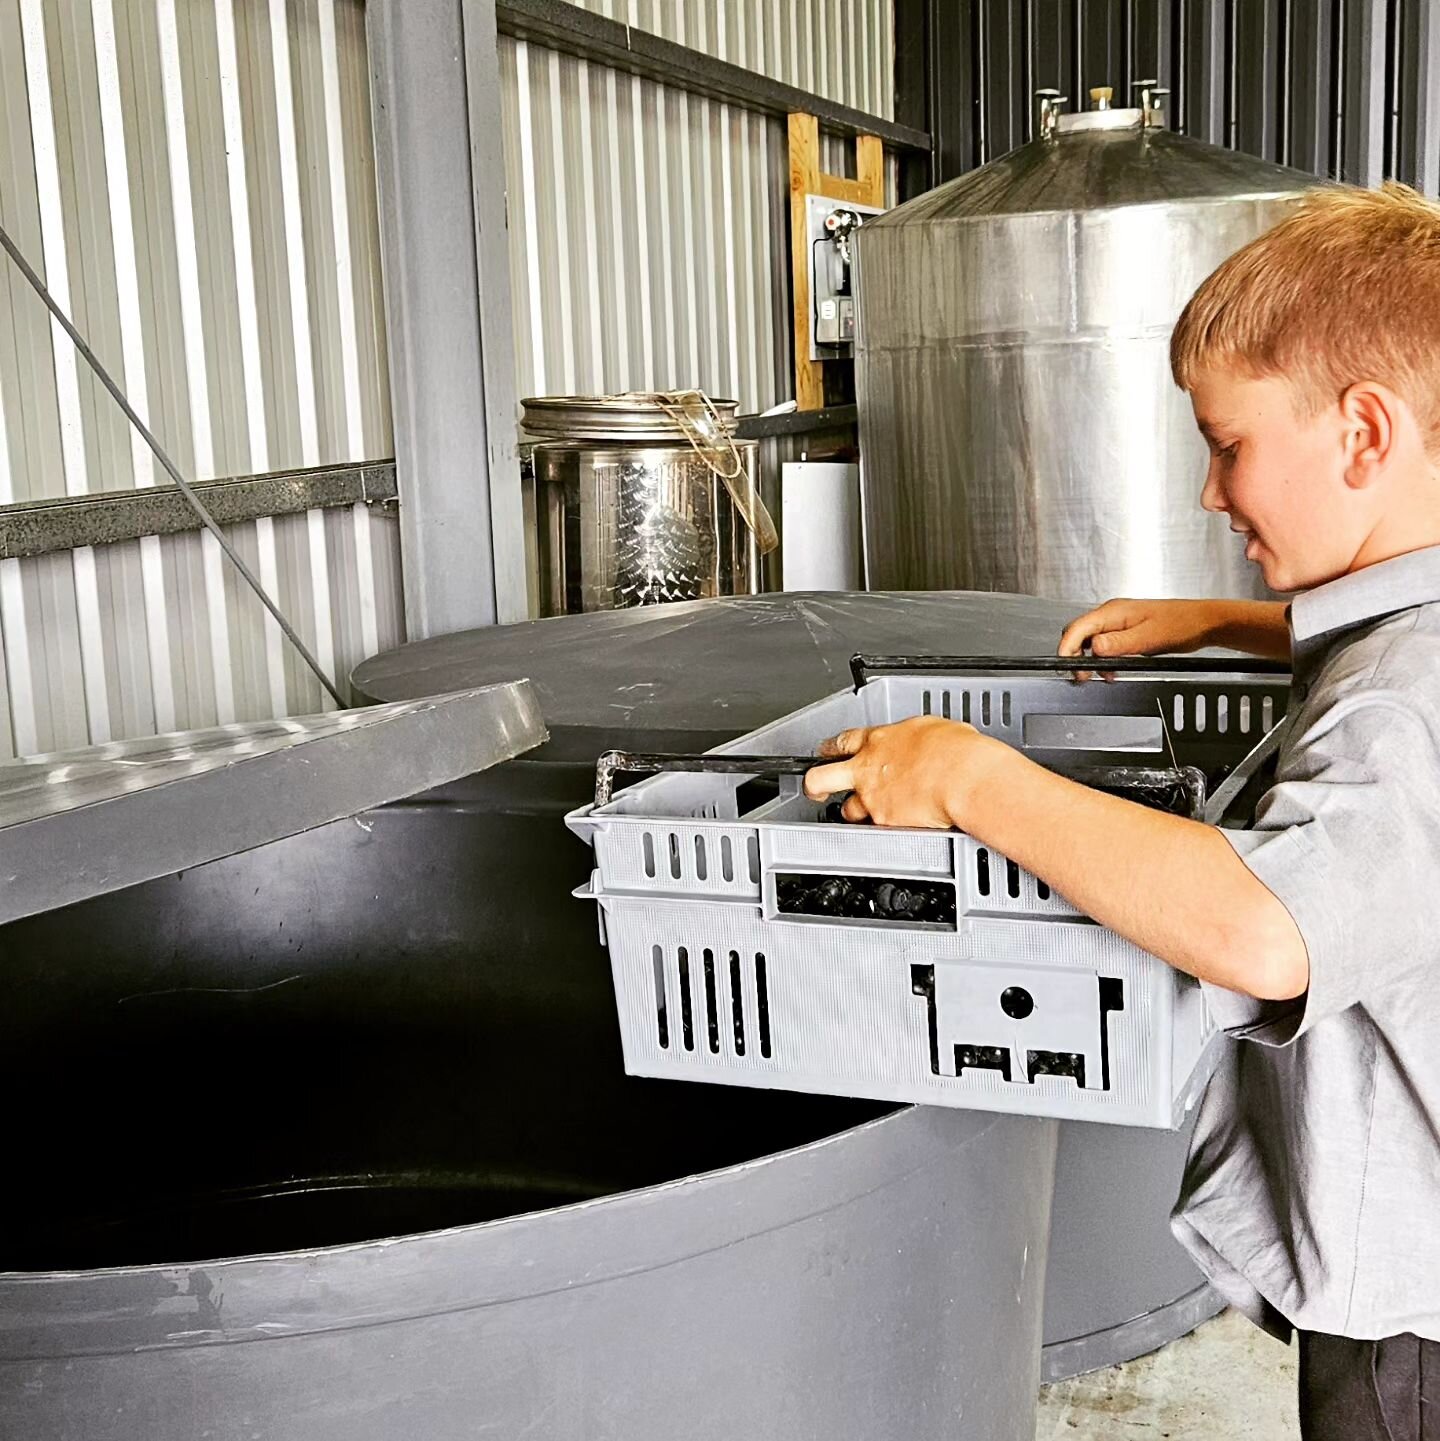 Some after school help! Tipping gamay bunches into the fermenter. Thanks Ralph 

#easthopefamilywinegrowers #finewine #hawkesbaywine #nzfinewine #gamay #ralph #easthopeboys #afterschool #helper #winery #cellarhand #winemaking #hbwine #fermenter